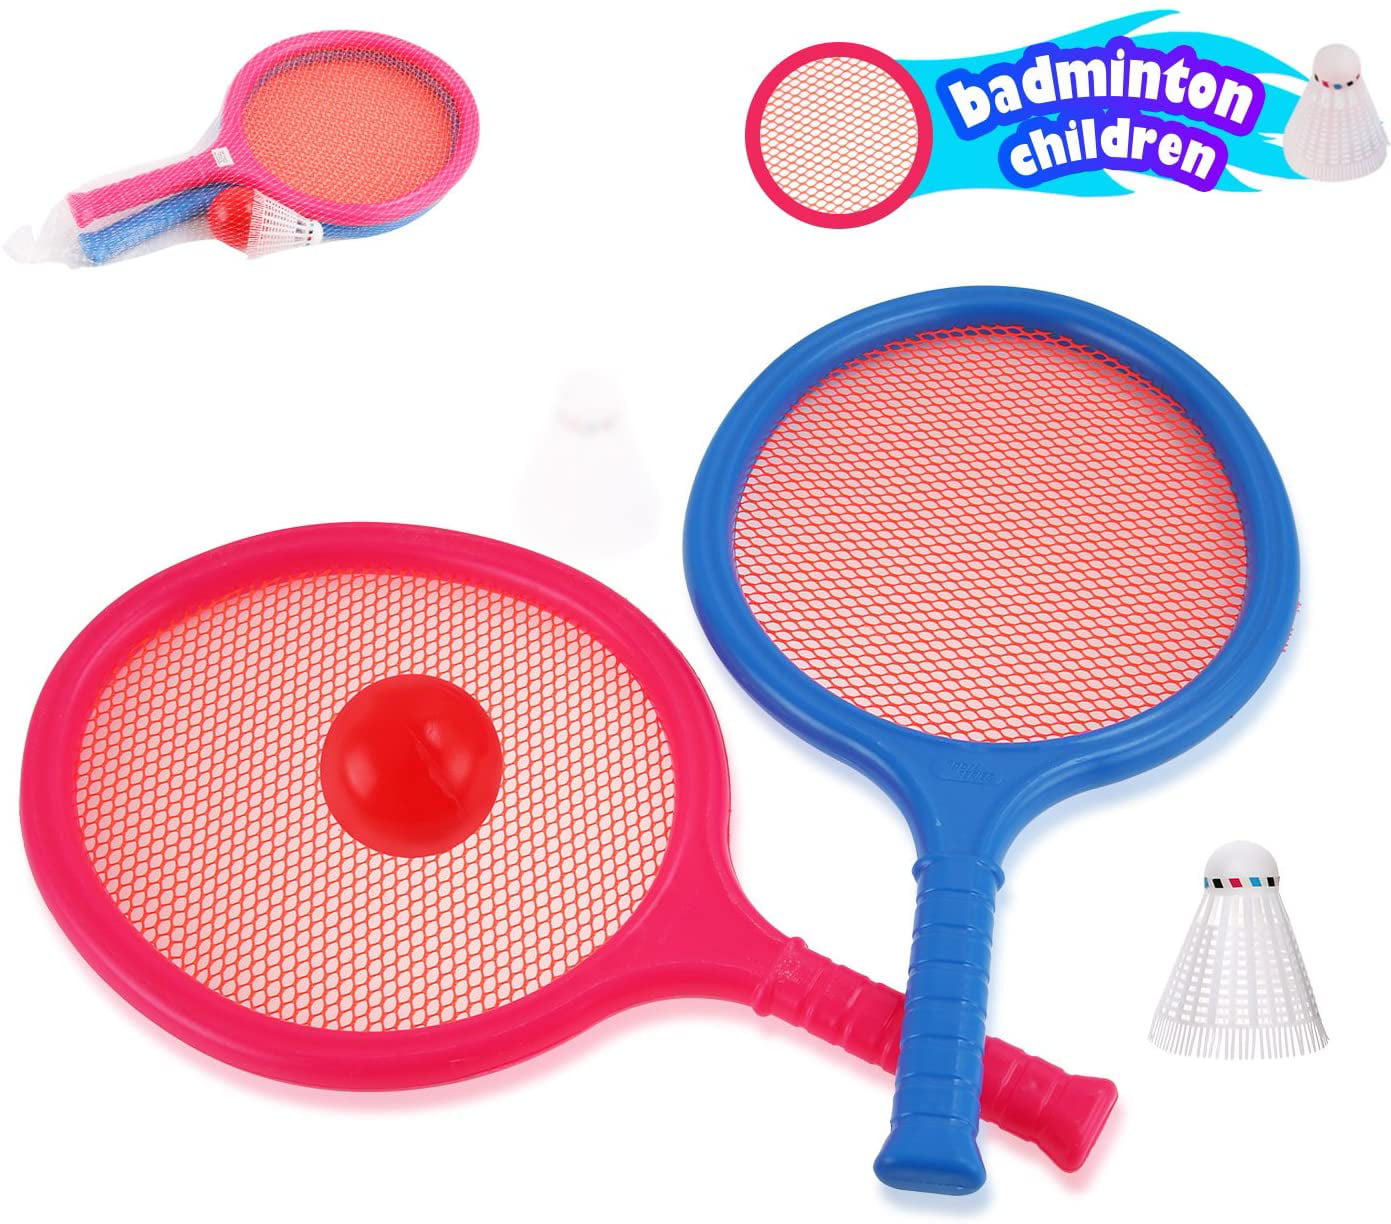 Suitable For All Ages Aluminium Tennis Racket Set 2 Rackets & Ball